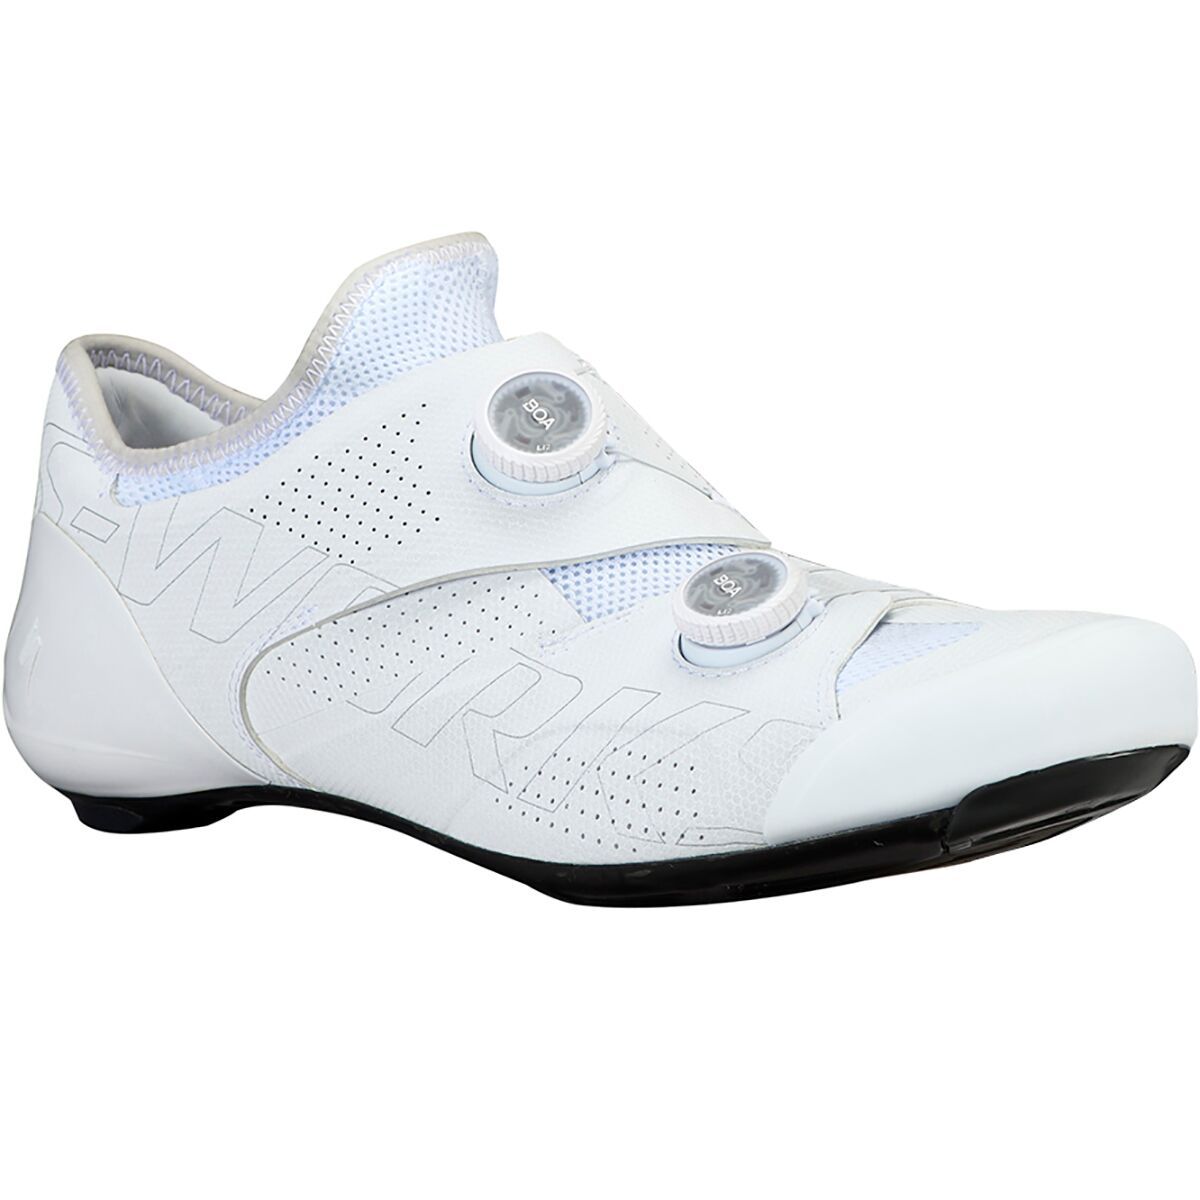 Specialized S-Works Ares Road Shoe - Bike